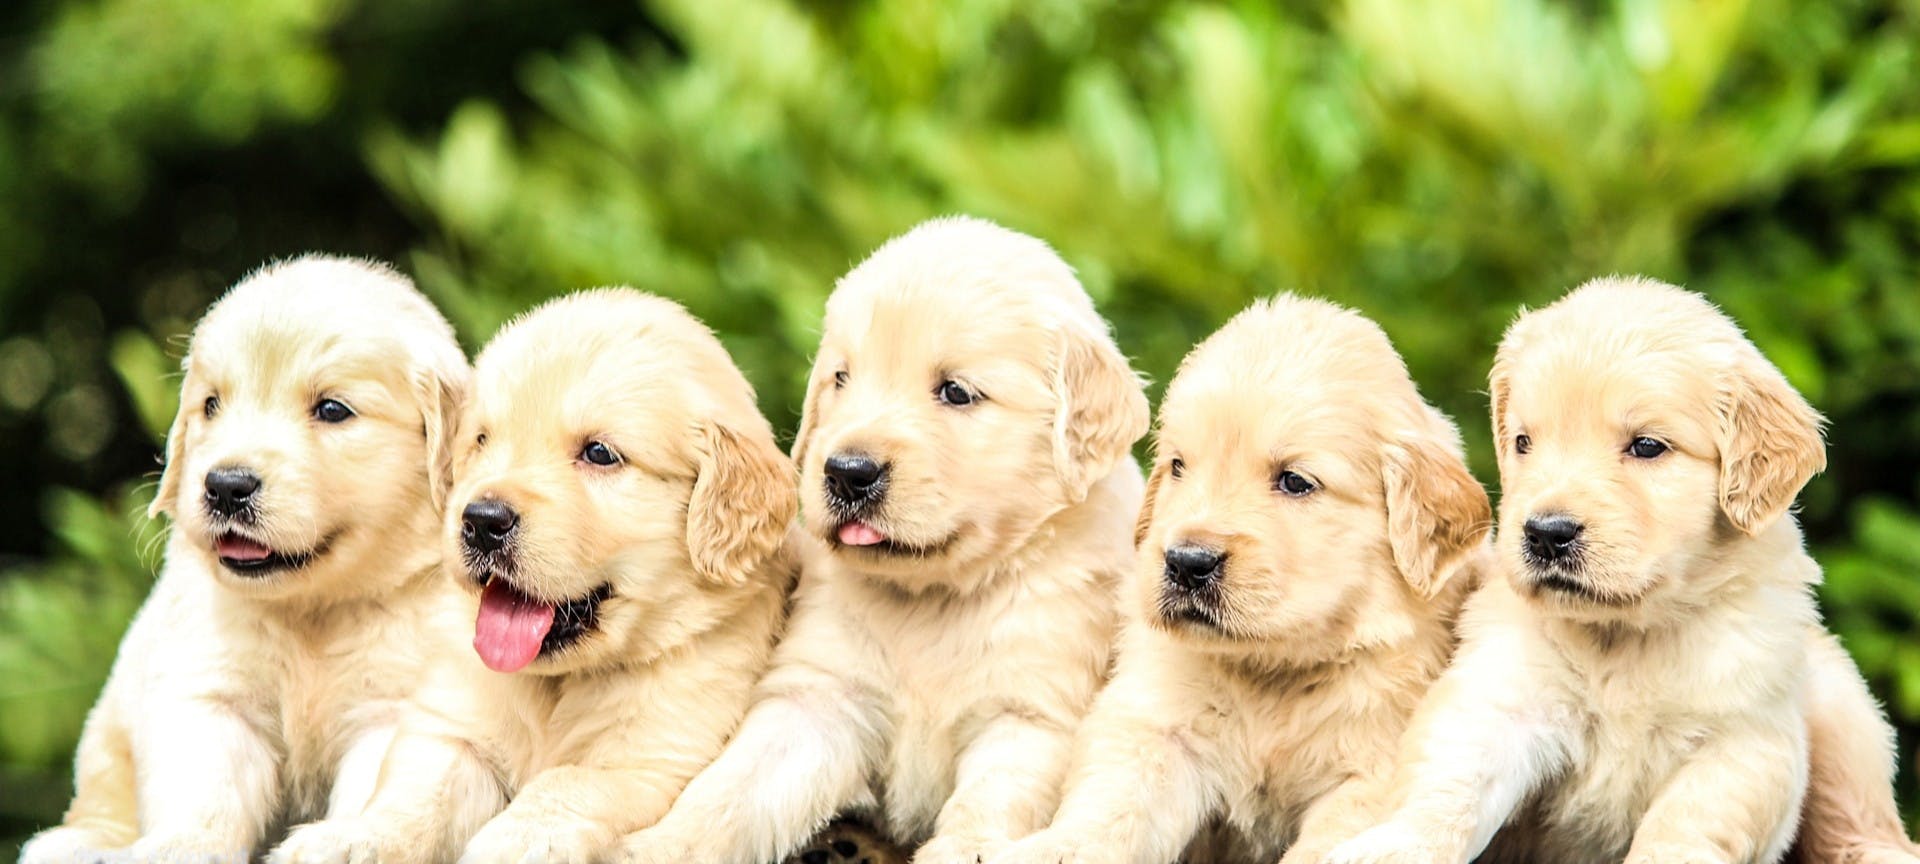 How Many Puppies Can a Golden Retriever Have?